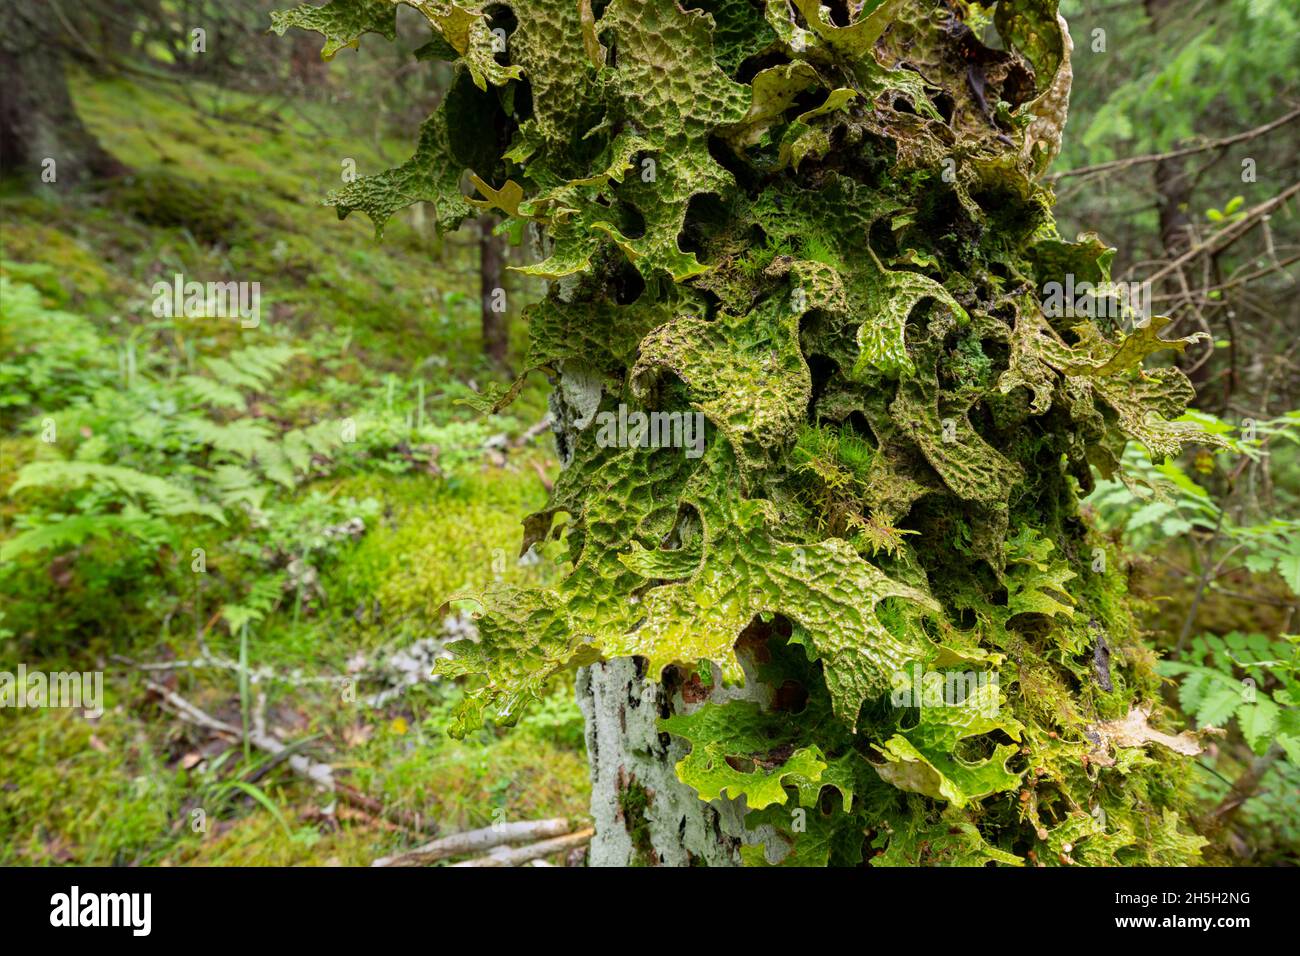 Tree lungwort, Lobaria pulmonaria growing on deciduous tree in forest Stock Photo